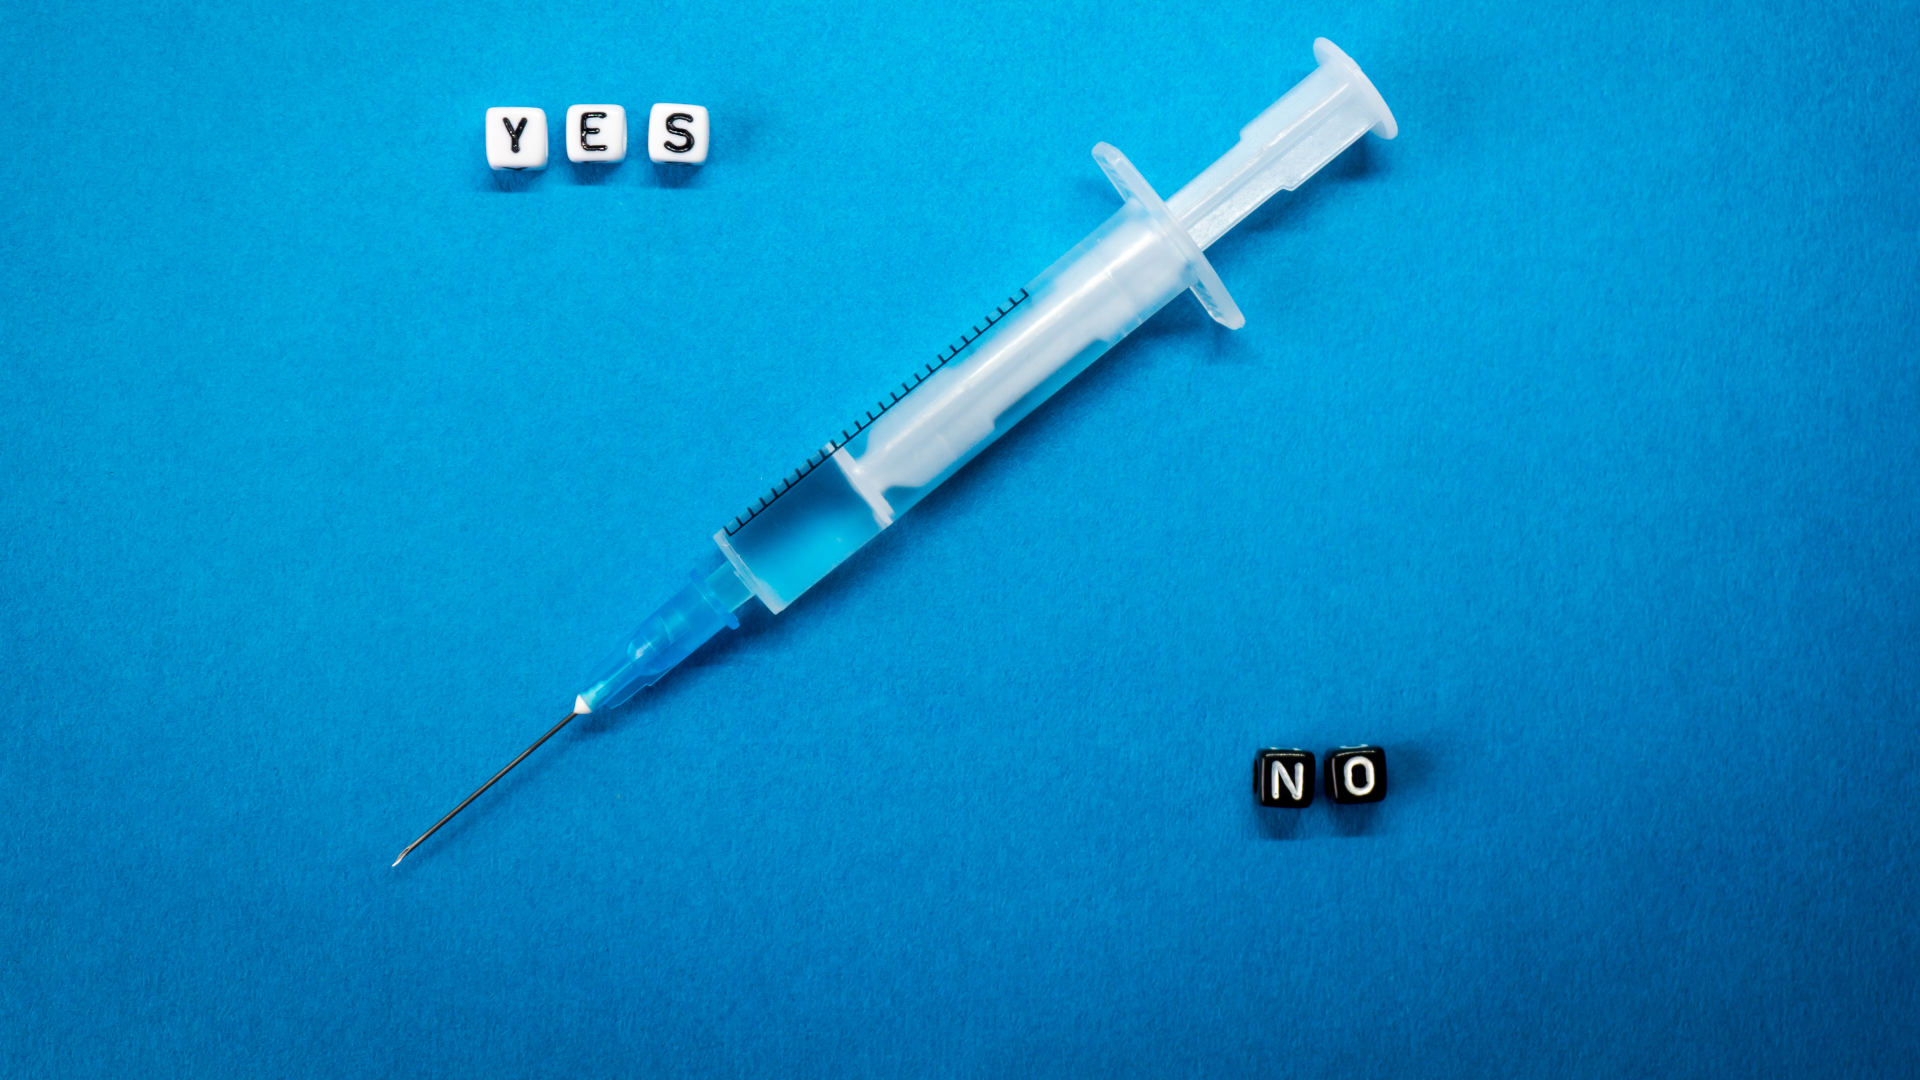 Yes No words made of square letters and a syringe on blue background.